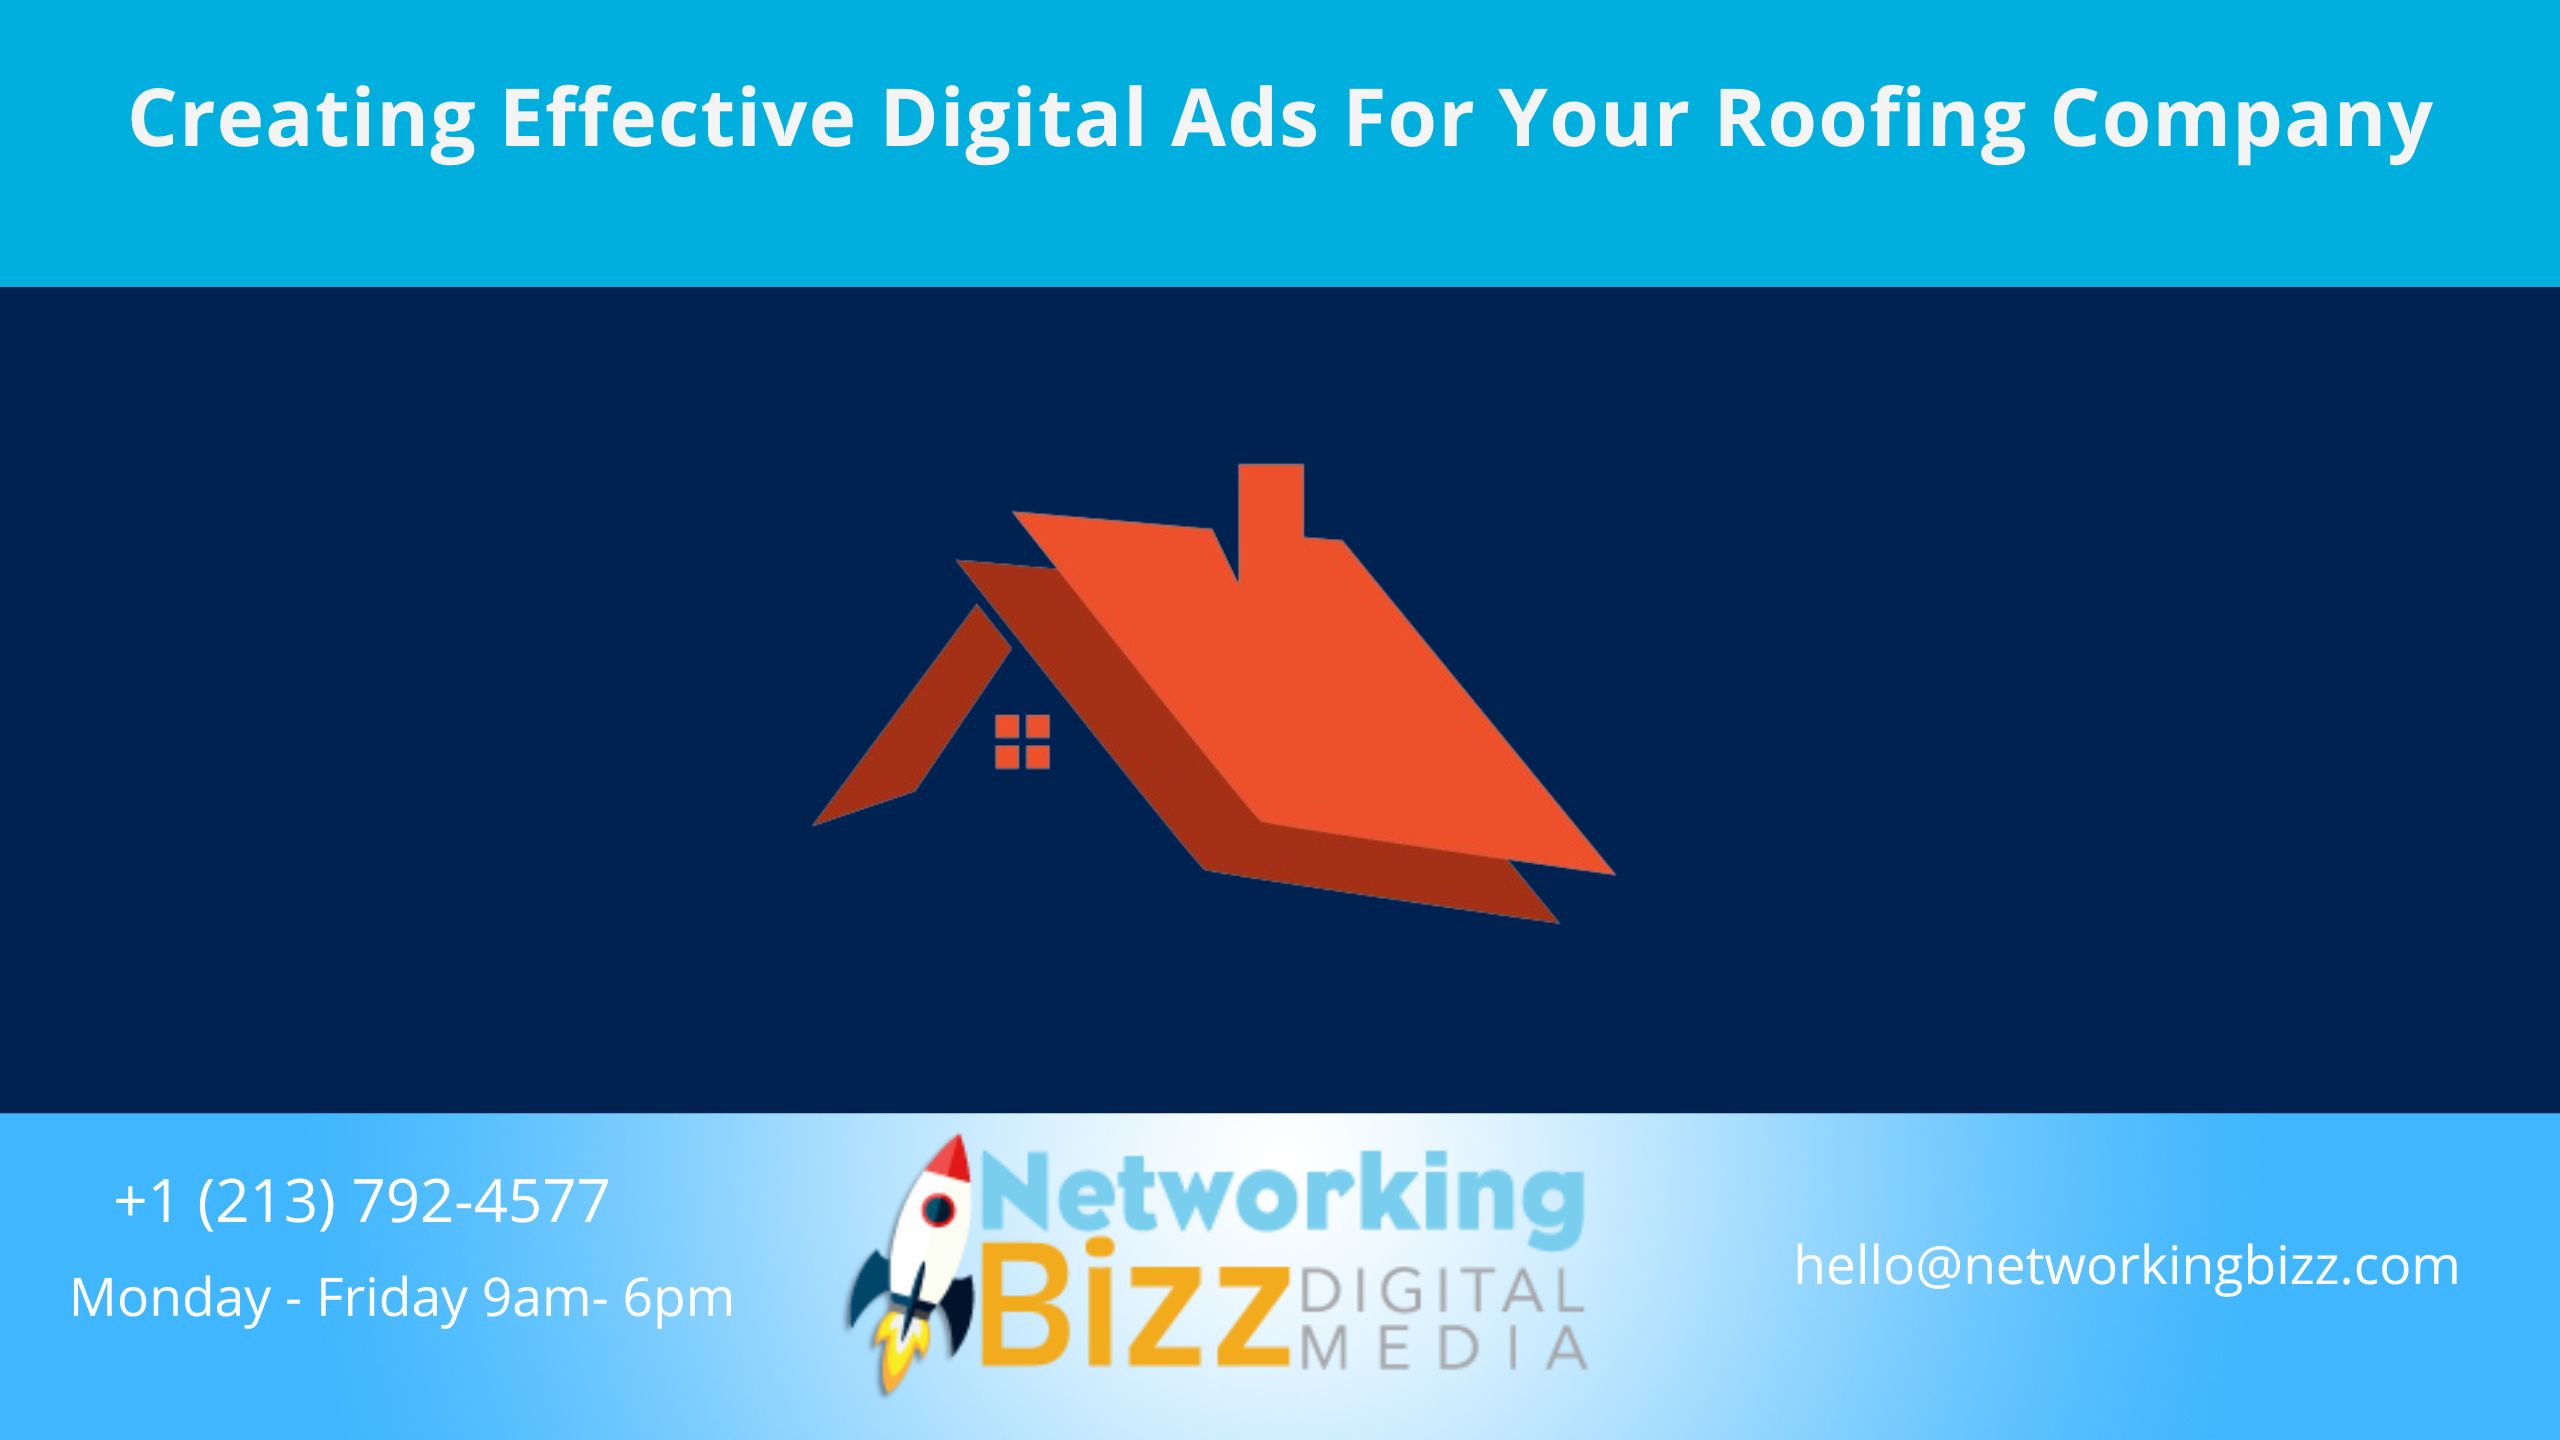 Creating Effective Digital Ads For Your Roofing Company